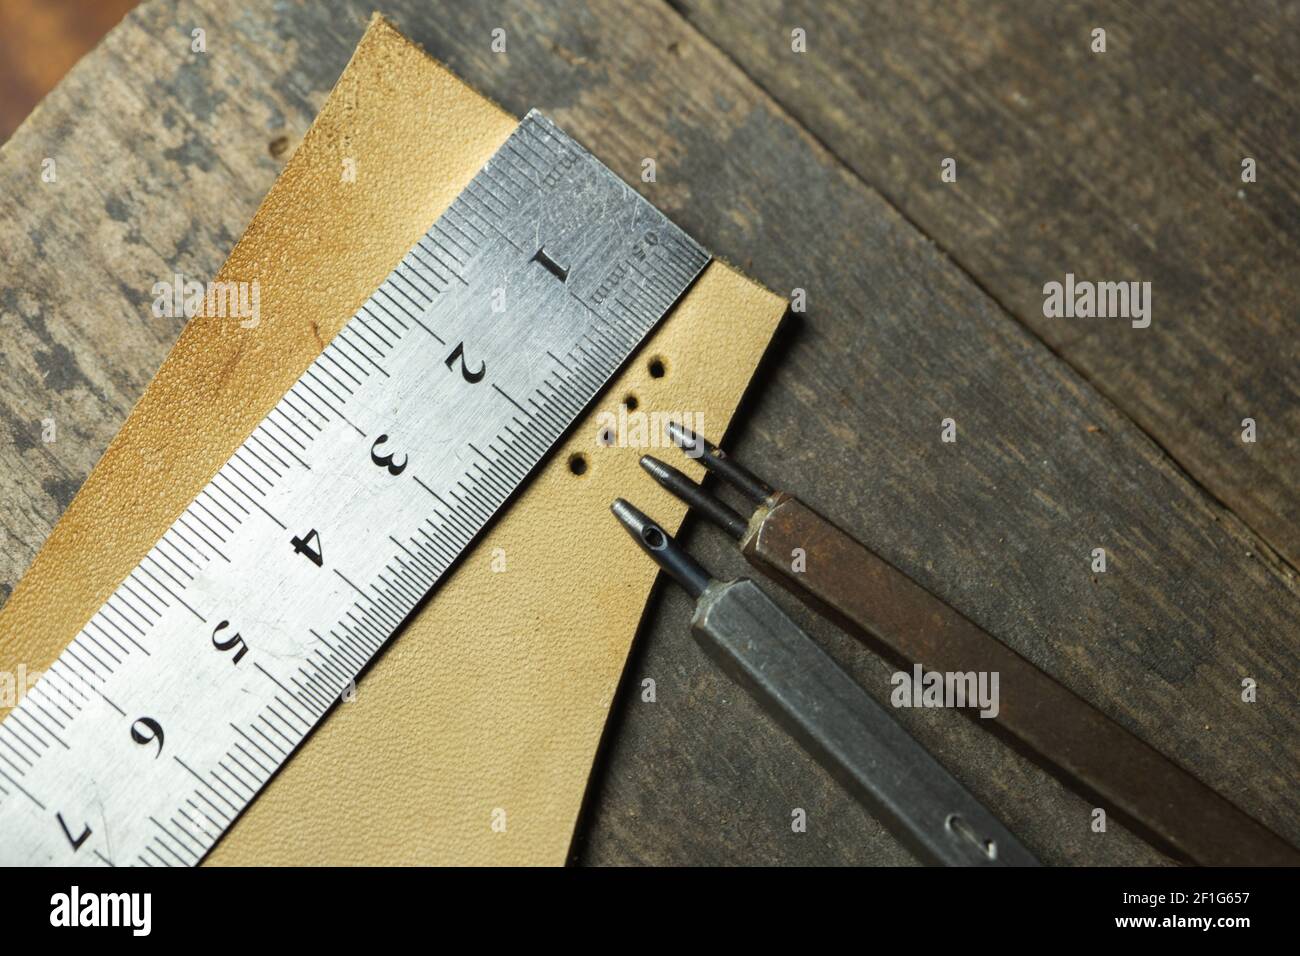 Set of leather 1-hole punchers on piece of leather and liner. Instruments of leather master working process. Stock Photo